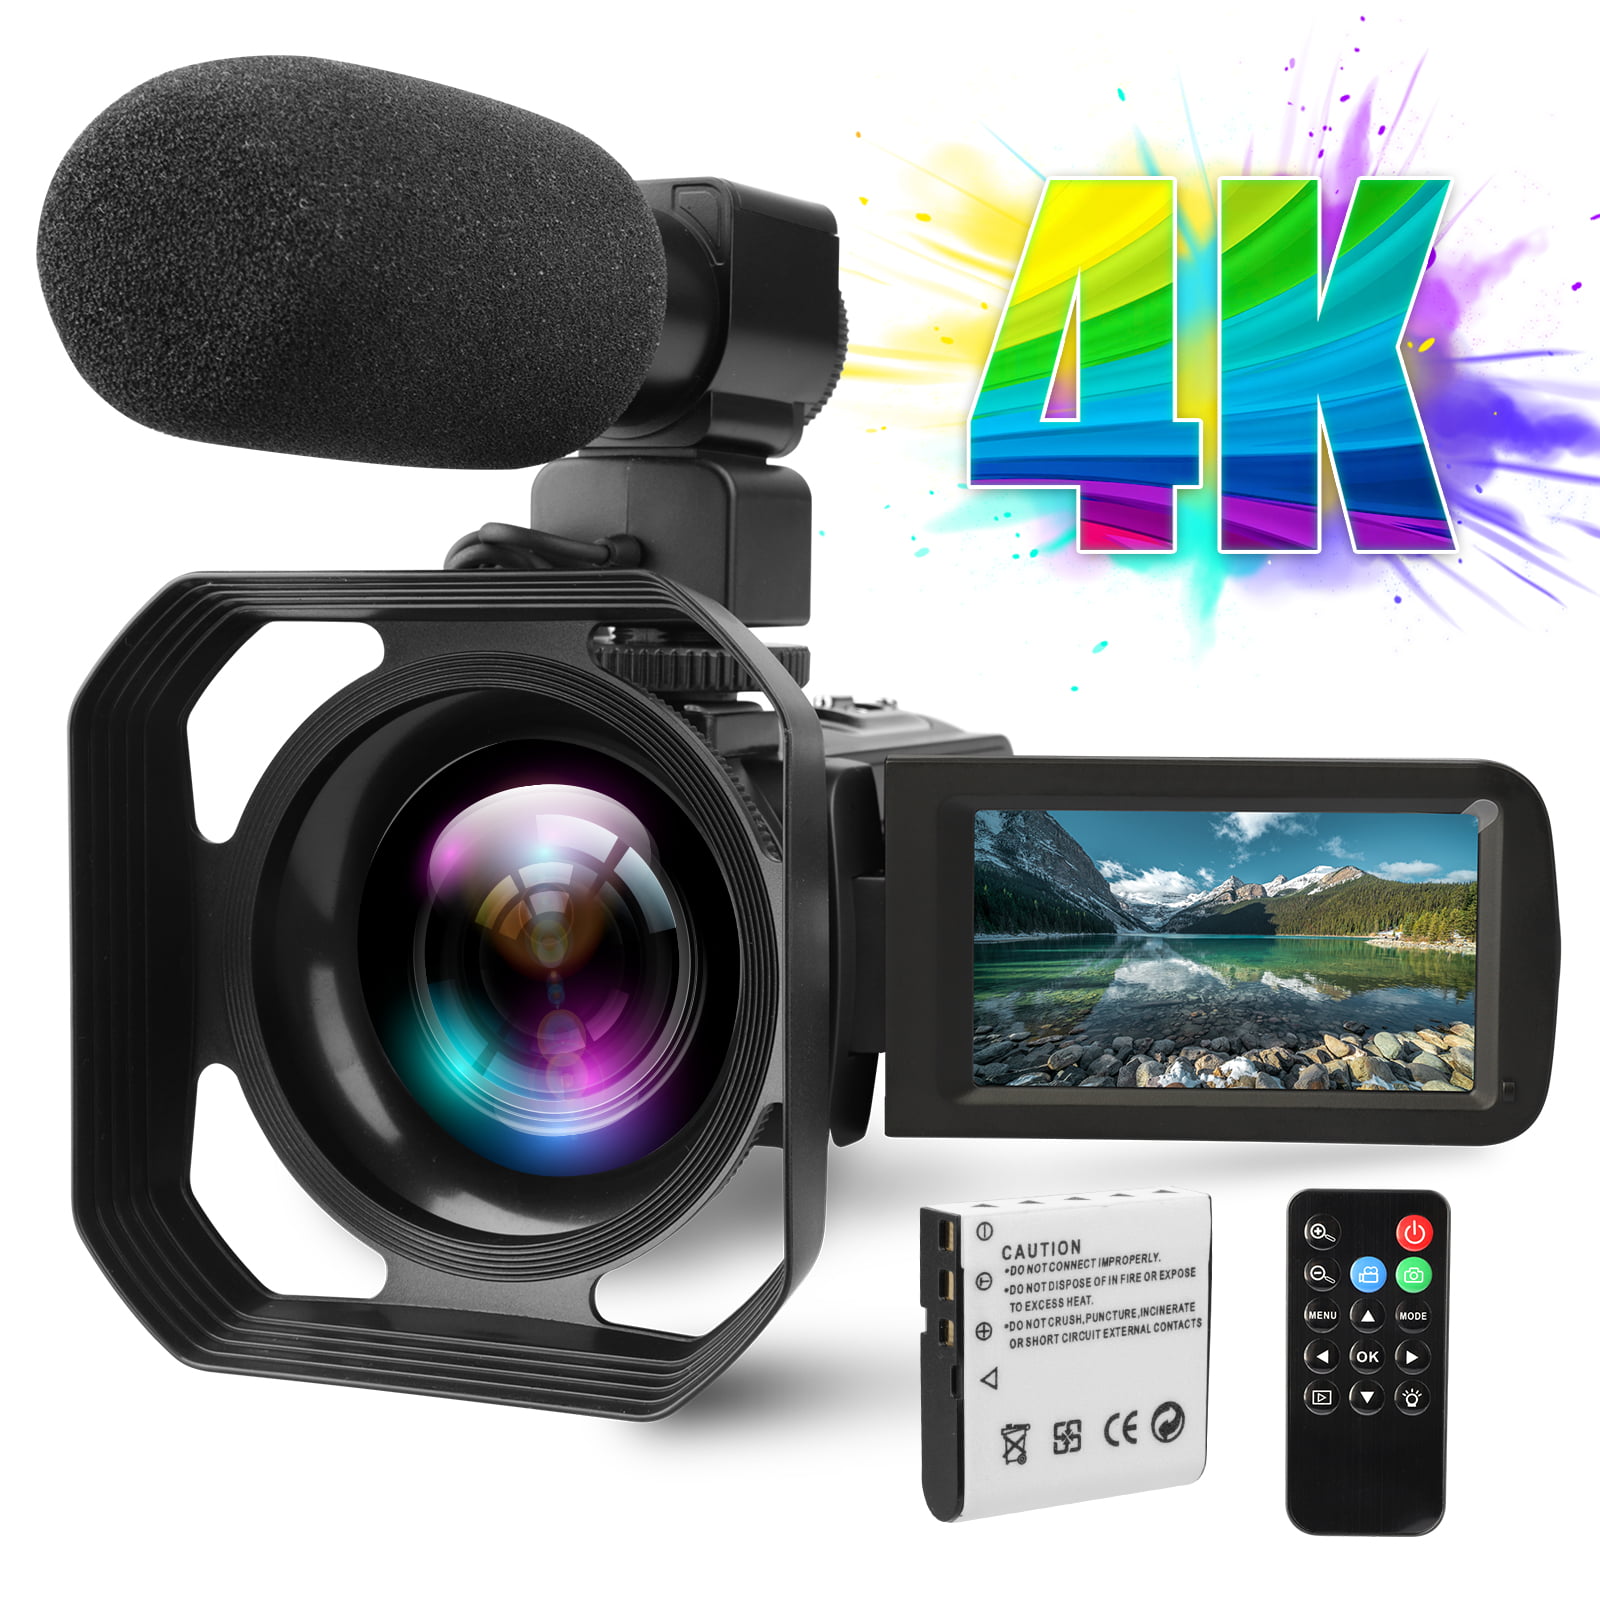 Ultra HD 2.7K 30FPS 30MP YouTube Vlogging Camera 3.0 Inch IPS Touch Screen 16X Digital Zoom Camera Recorder Video Camera Camcorder